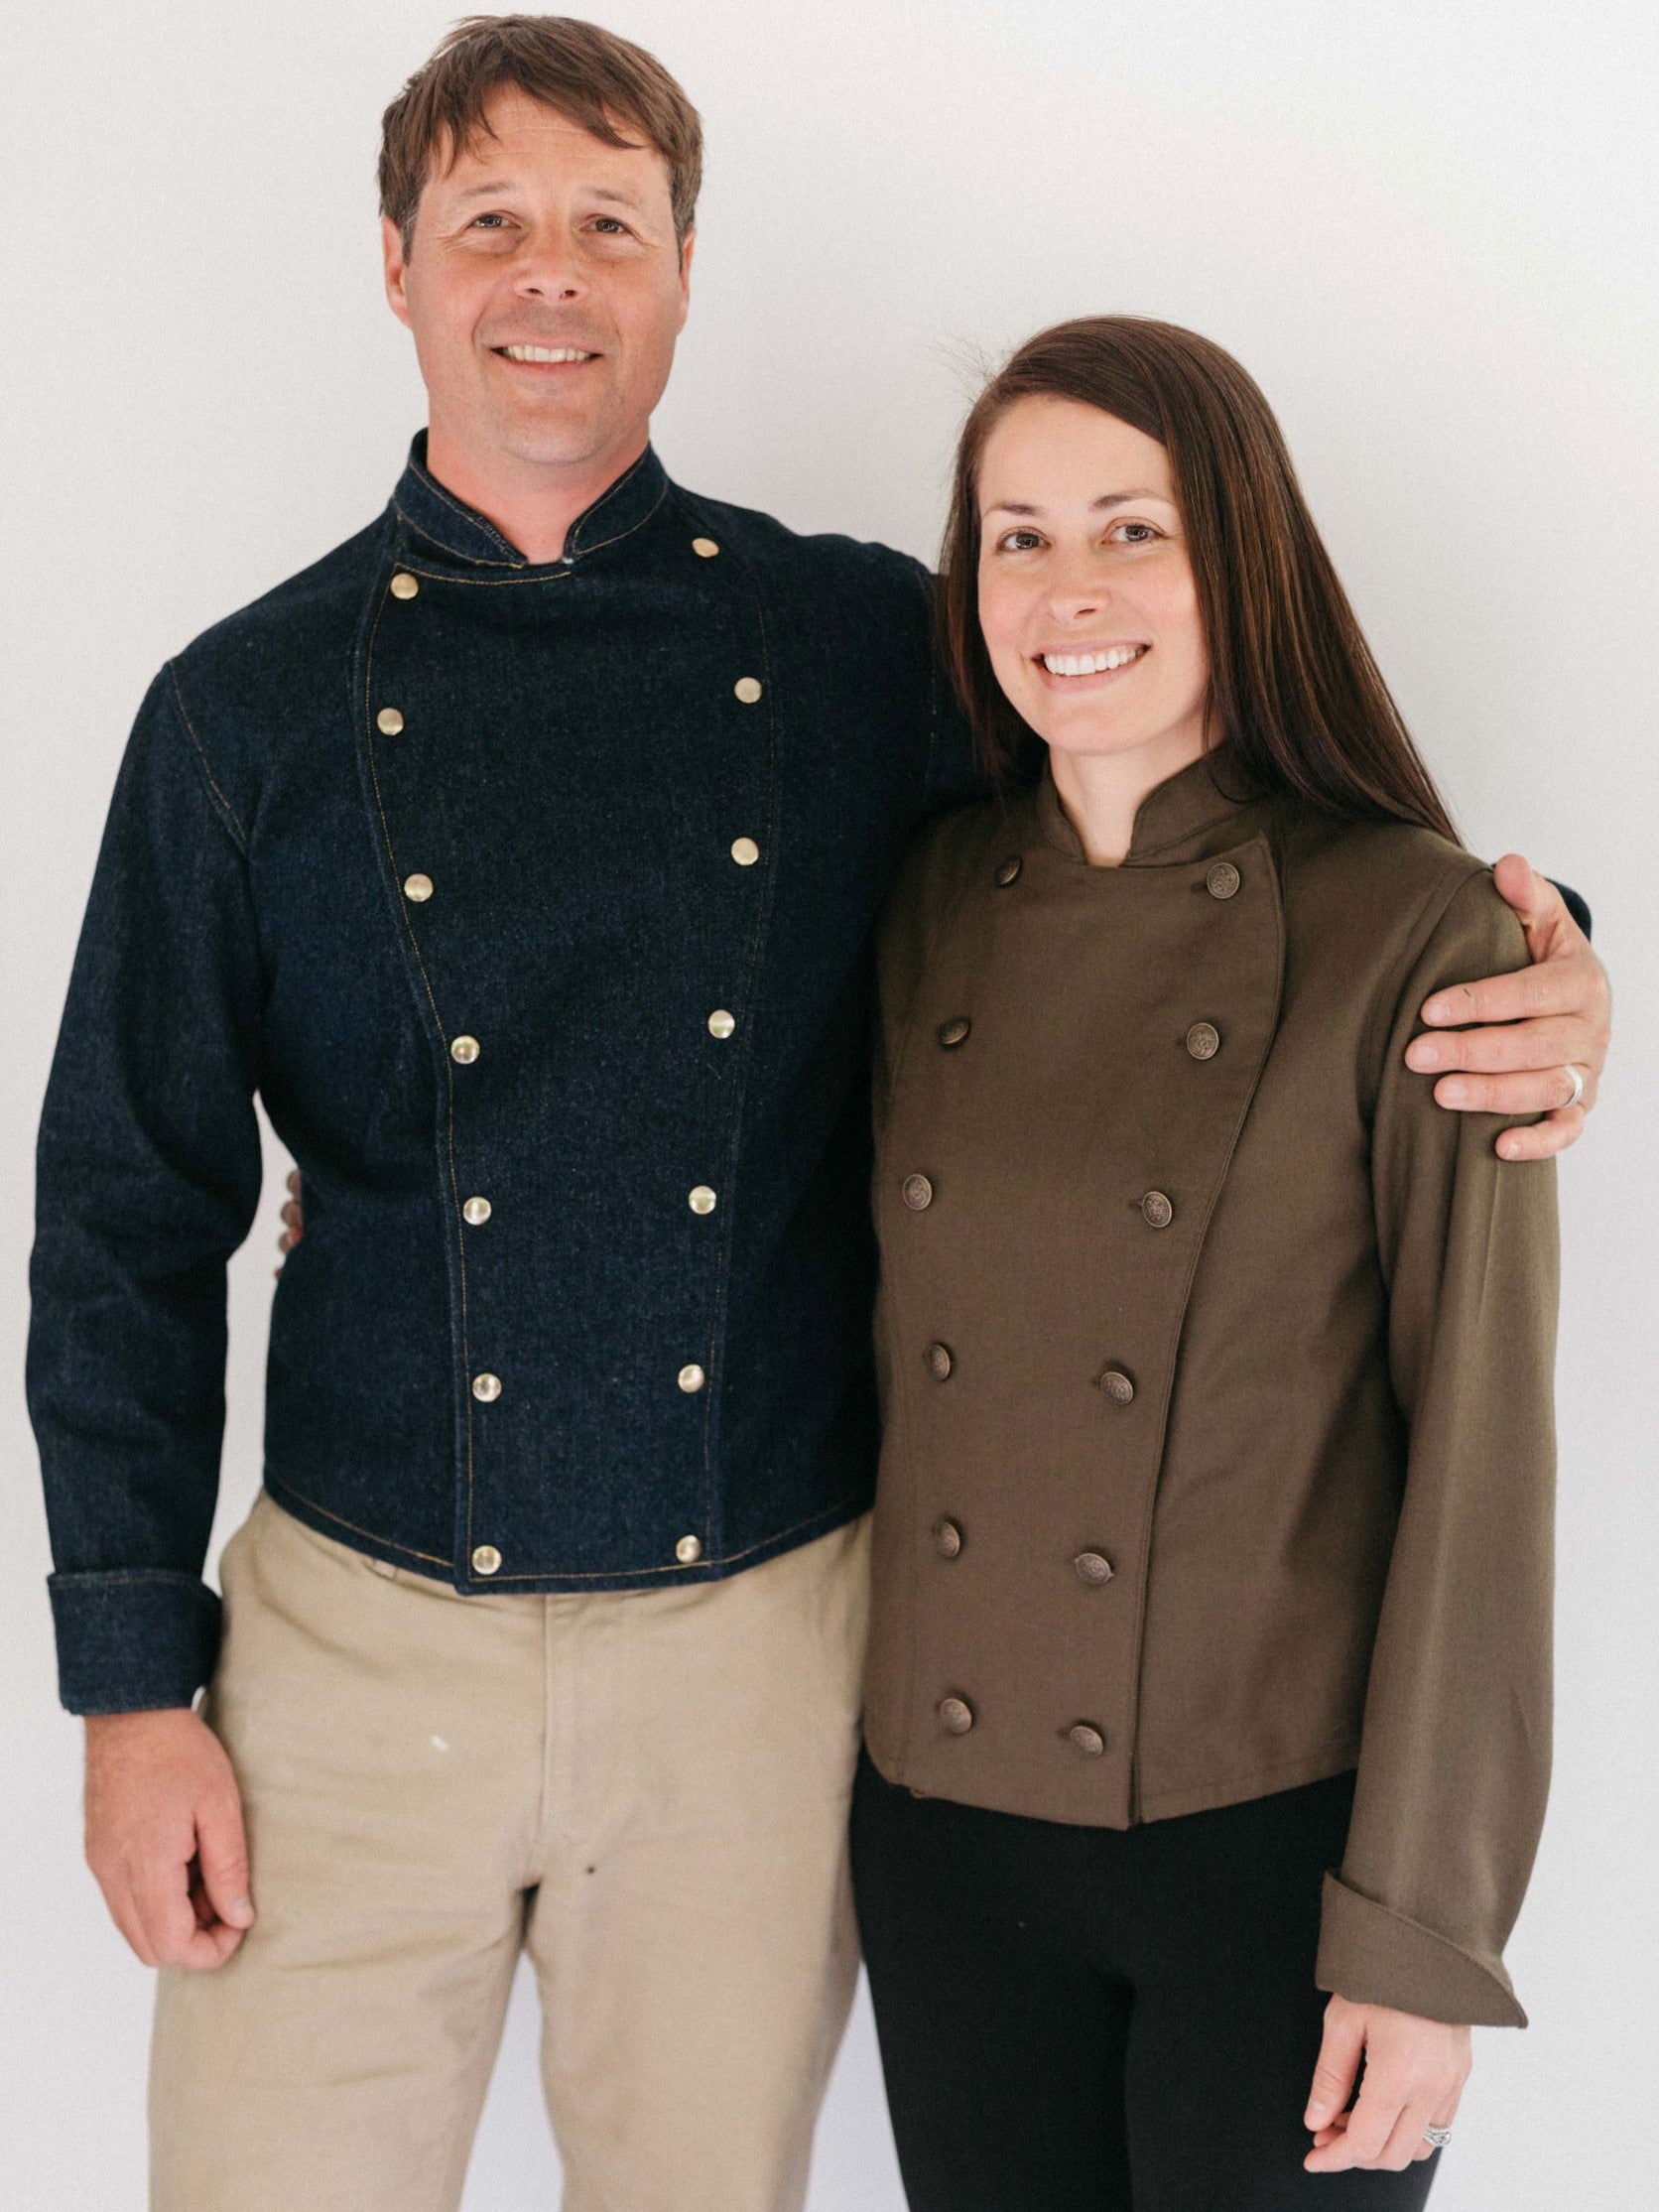 Man and woman wearing Belgian Military Chef's Jackets.  Woman on the right has on an olive coat.  Man on left has a dark blue denim coat.  Coats are double breasted with two rows of buttons.  Man's arm is around the woman's shoulders.